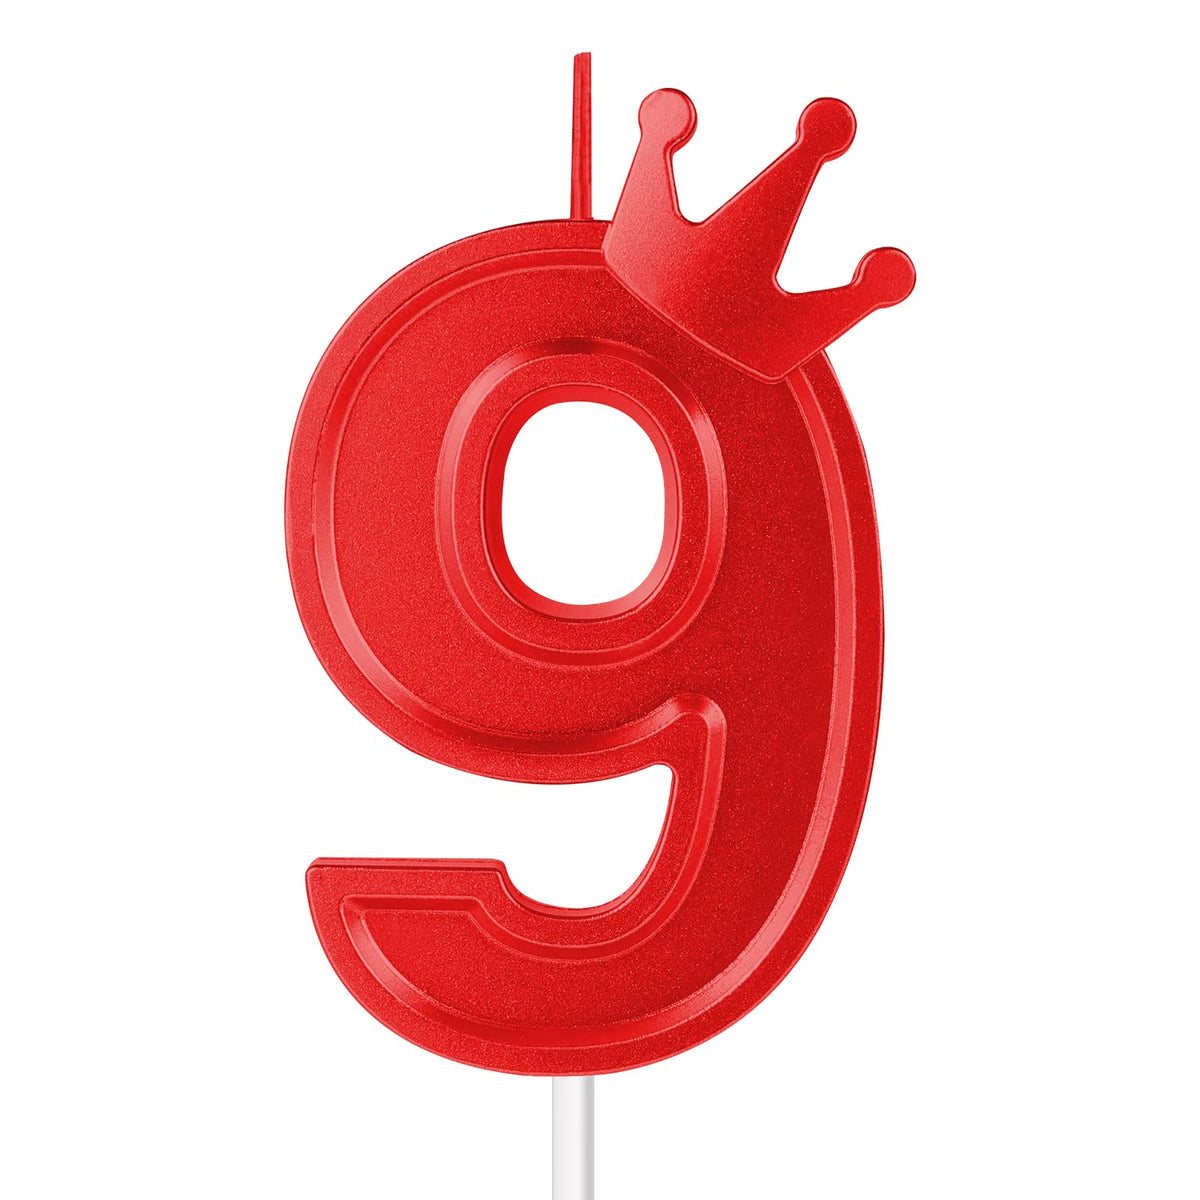 AIEX 3 Inch Birthday Number Candle, Large Birthday Candles 3D Number Candles for Birthday Cakes with Crown Decor Cake Topper Candle for Wedding Valentine Anniversary Festival Party (Red, 9)